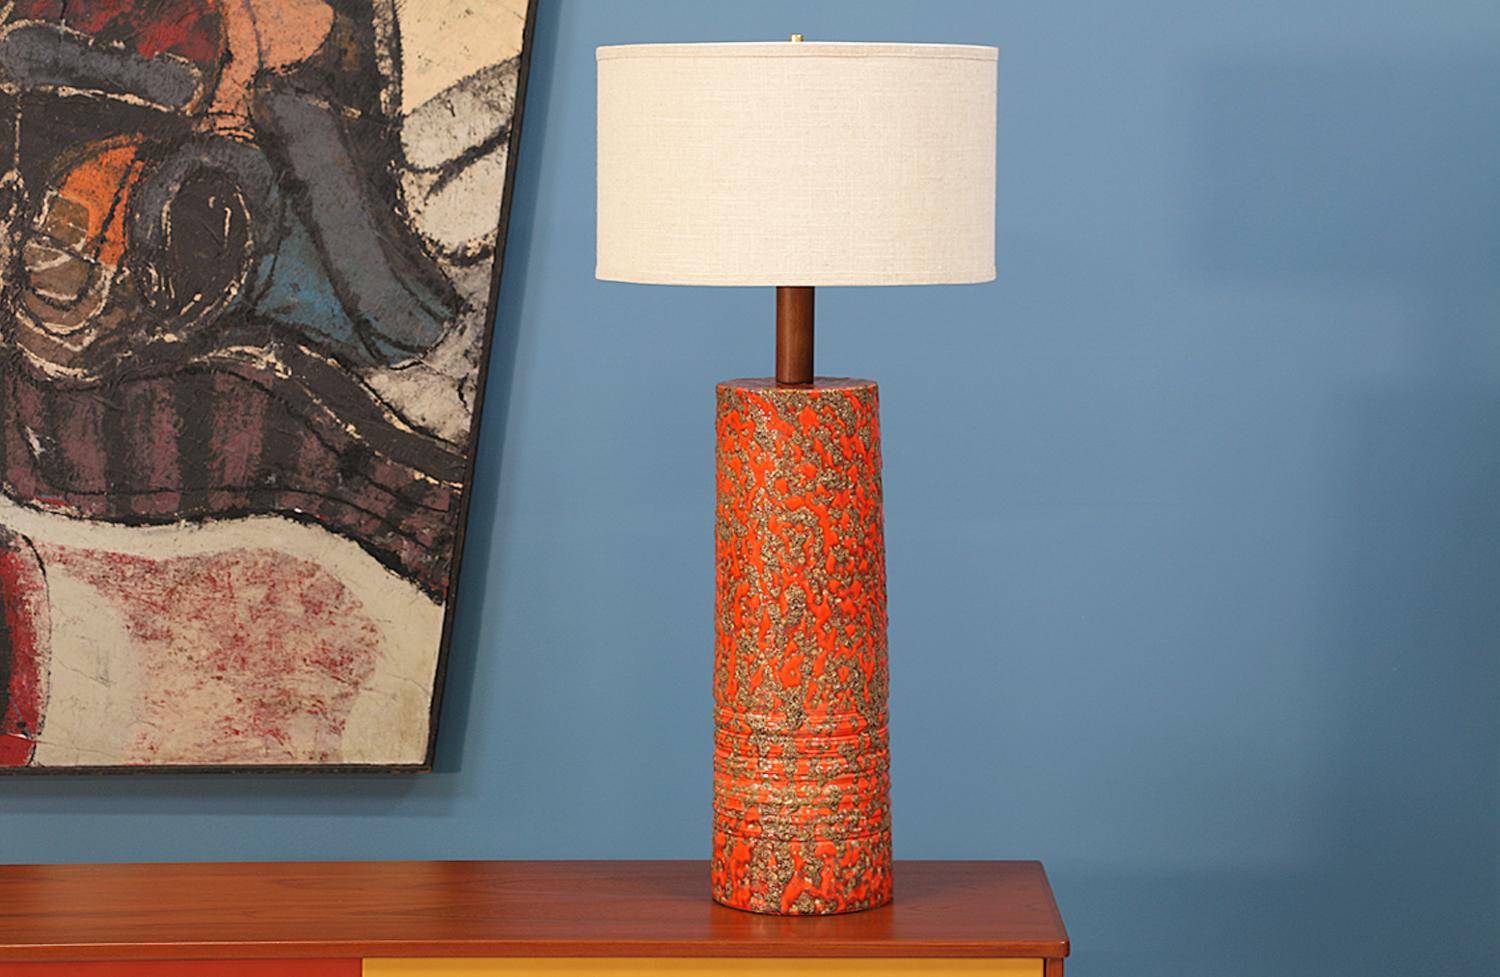 Mid Century Modern ceramic table lamp designed and manufactured in the United States circa 1950’s. Its cylindric body has a dripped lava-glazed texture in orange and brown hues that is complimented by the walnut wood neck. Includes custom linen